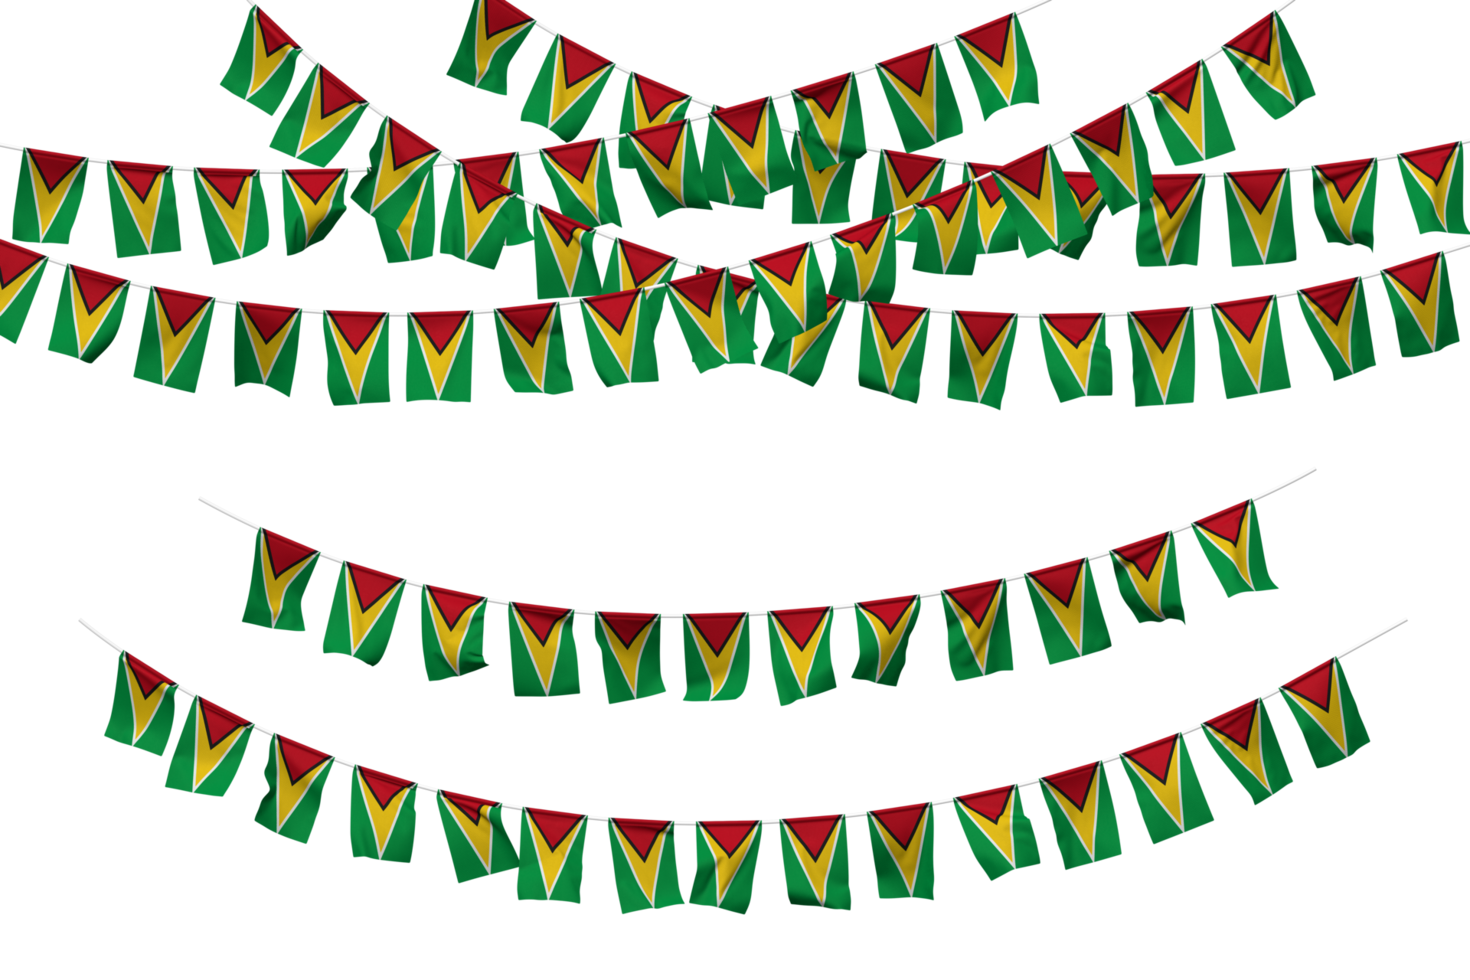 Guyana Flag Bunting Decoration on The Rope, Jhandi, Set of Small Flag Celebration, 3D Rendering png